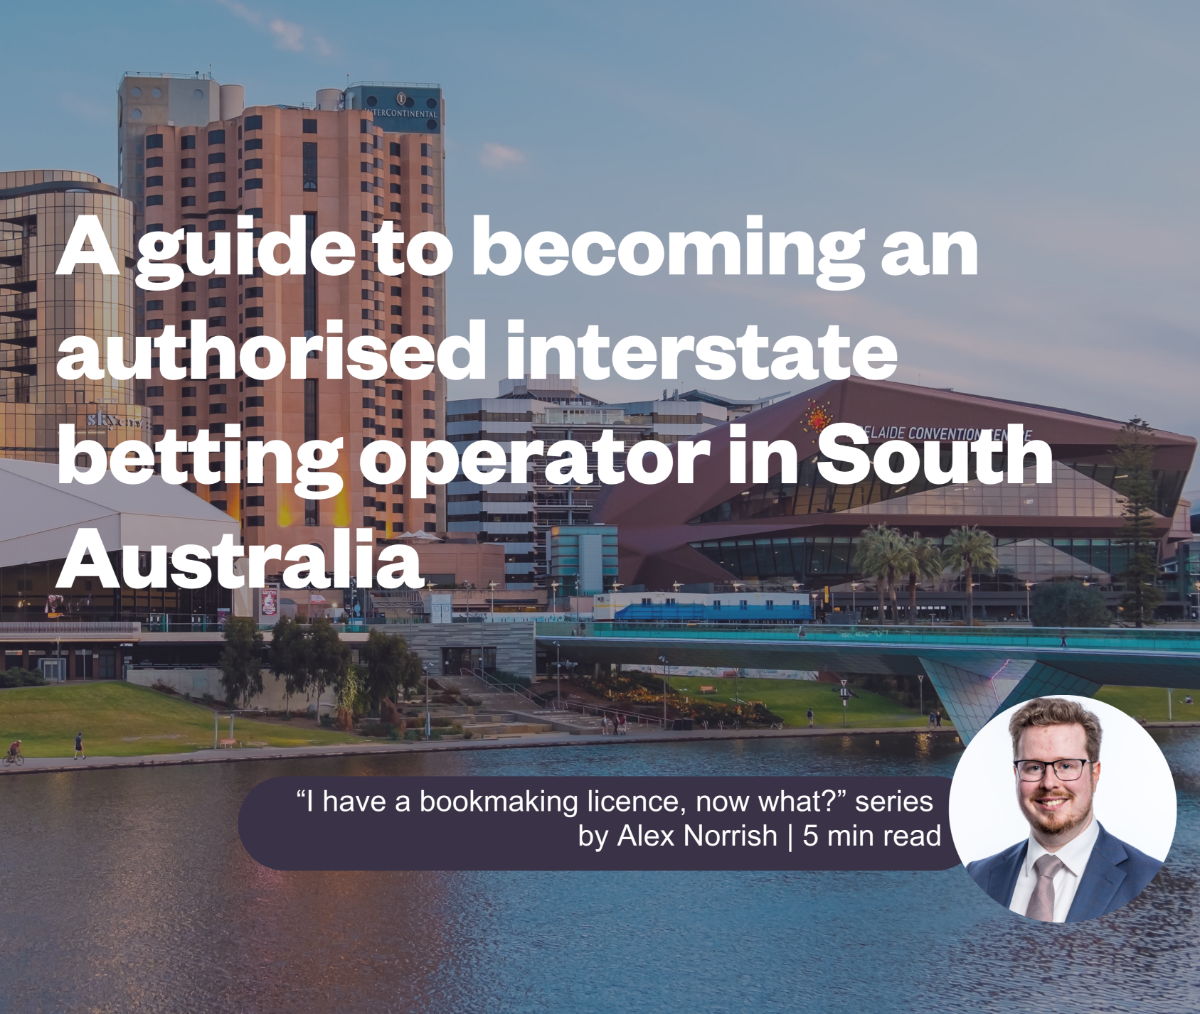 I have a licence, now what? A guide to becoming an authorised interstate betting operator in SA.